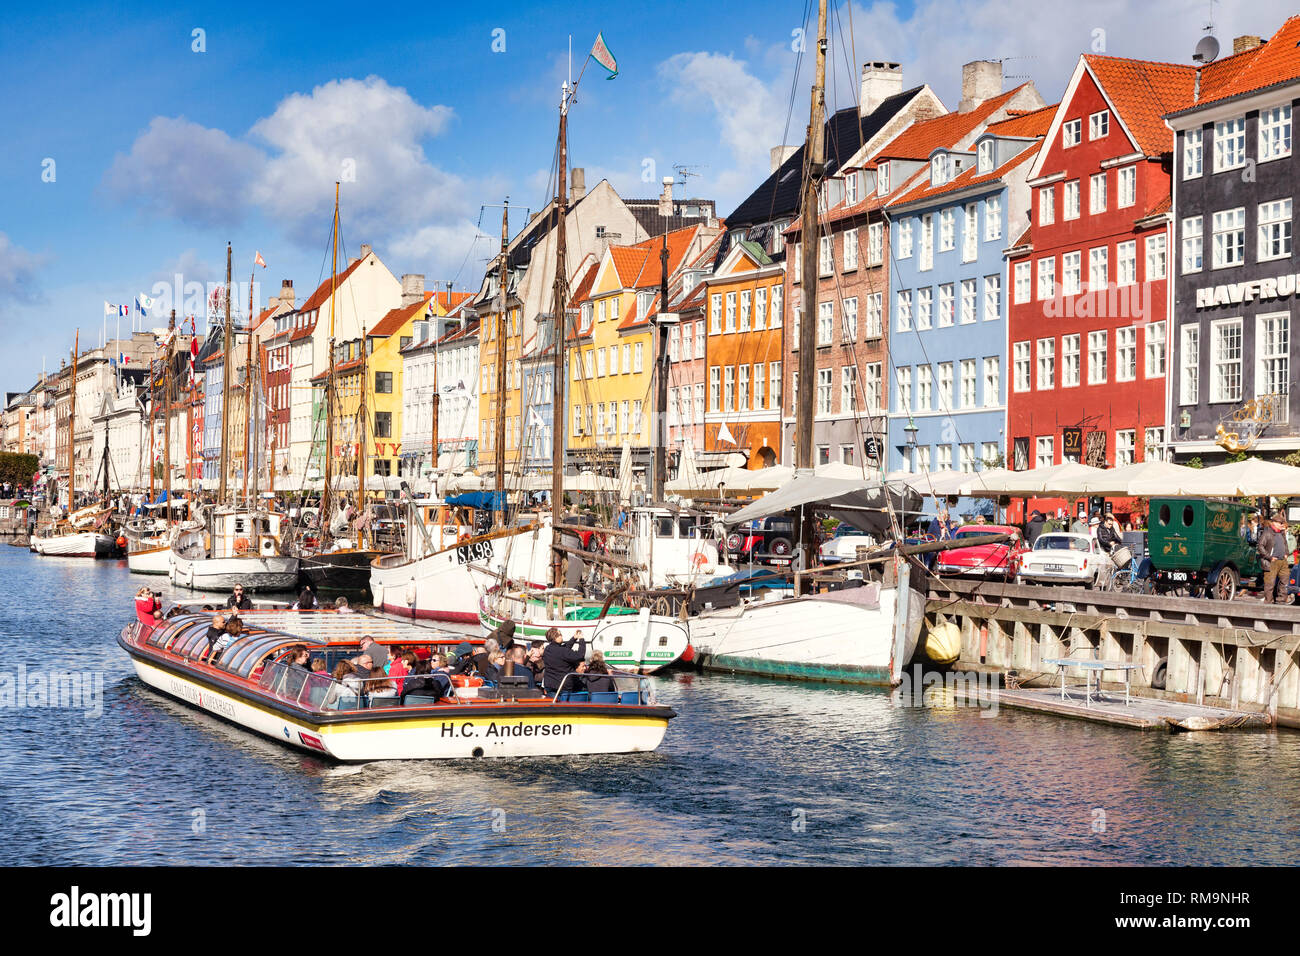 23 September 2018: Copenhagen, Denmark - Canal boat full of tourists sightseeing along the canal in the Copenhagen district of Nyhavn, with its colour Stock Photo